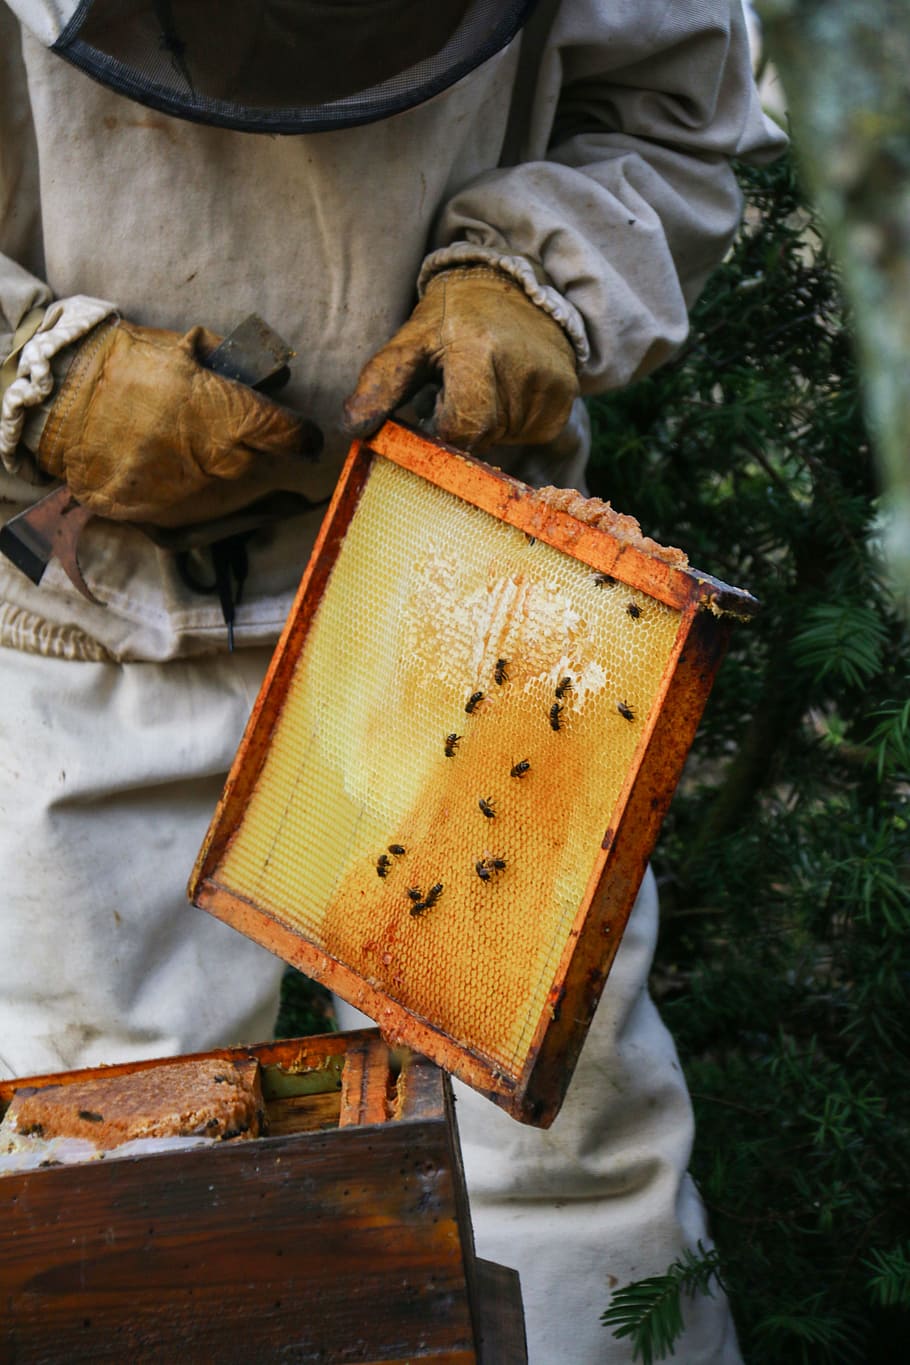 Beekeeper, Honey, Hive, Bees, Nature, insect, cell, swarm, beekeeping